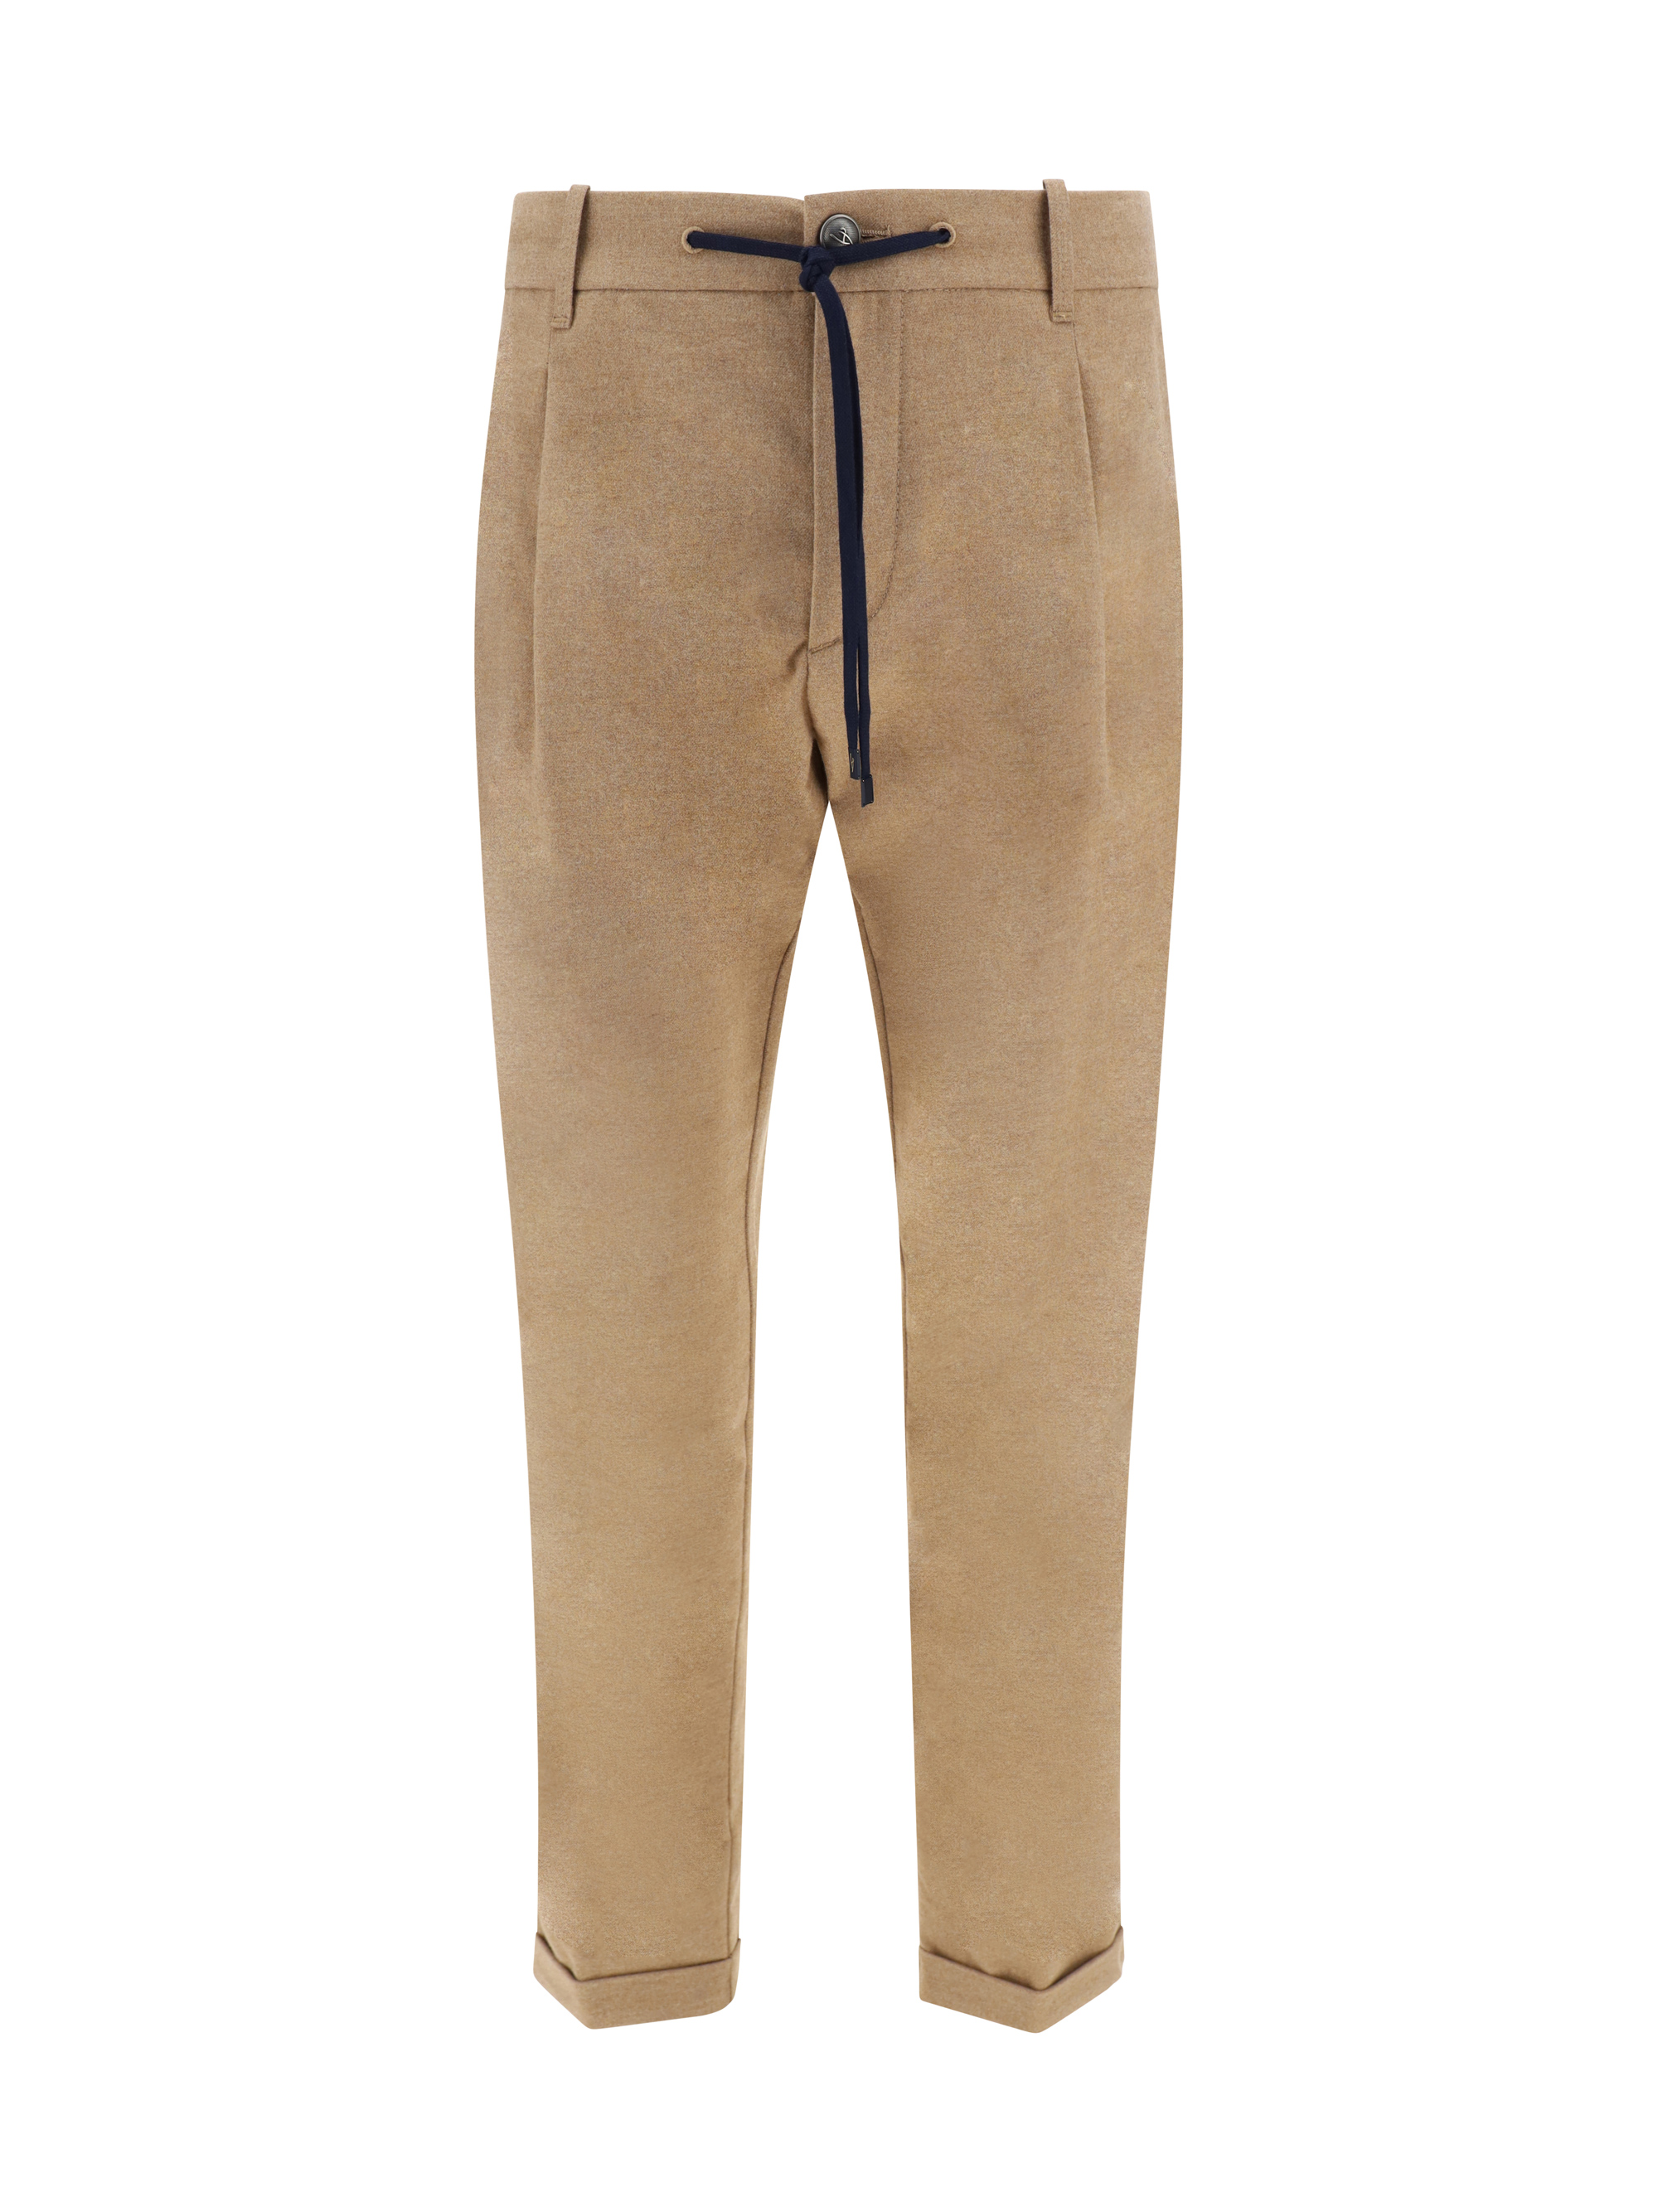 Hand Picked Trousers In Cammello